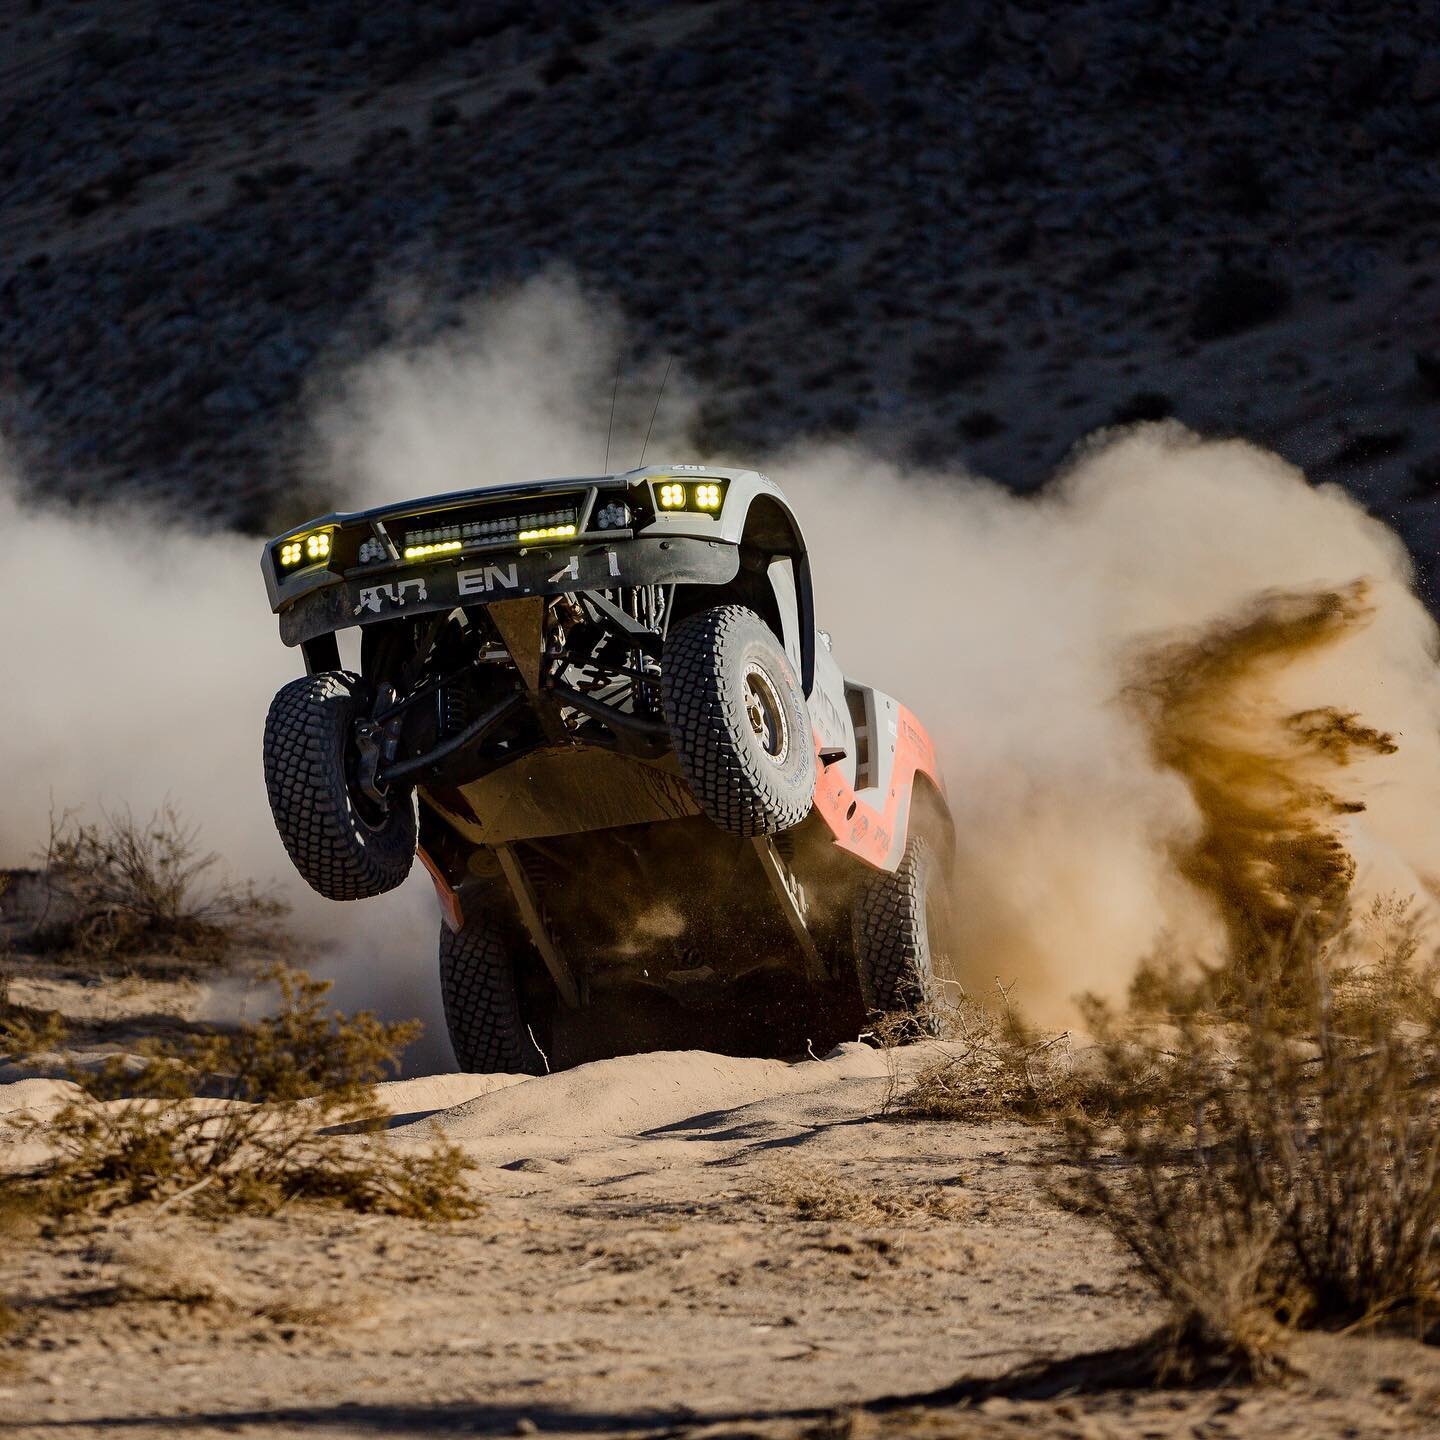 Big Monday energy. Coming into the week strong. @jeffbader_racing @oc_dan_fresh 

This was shot during the Toyo Tires Desert Challenge at @ultra4racing King of the Hammers! #trophytruck #KOH